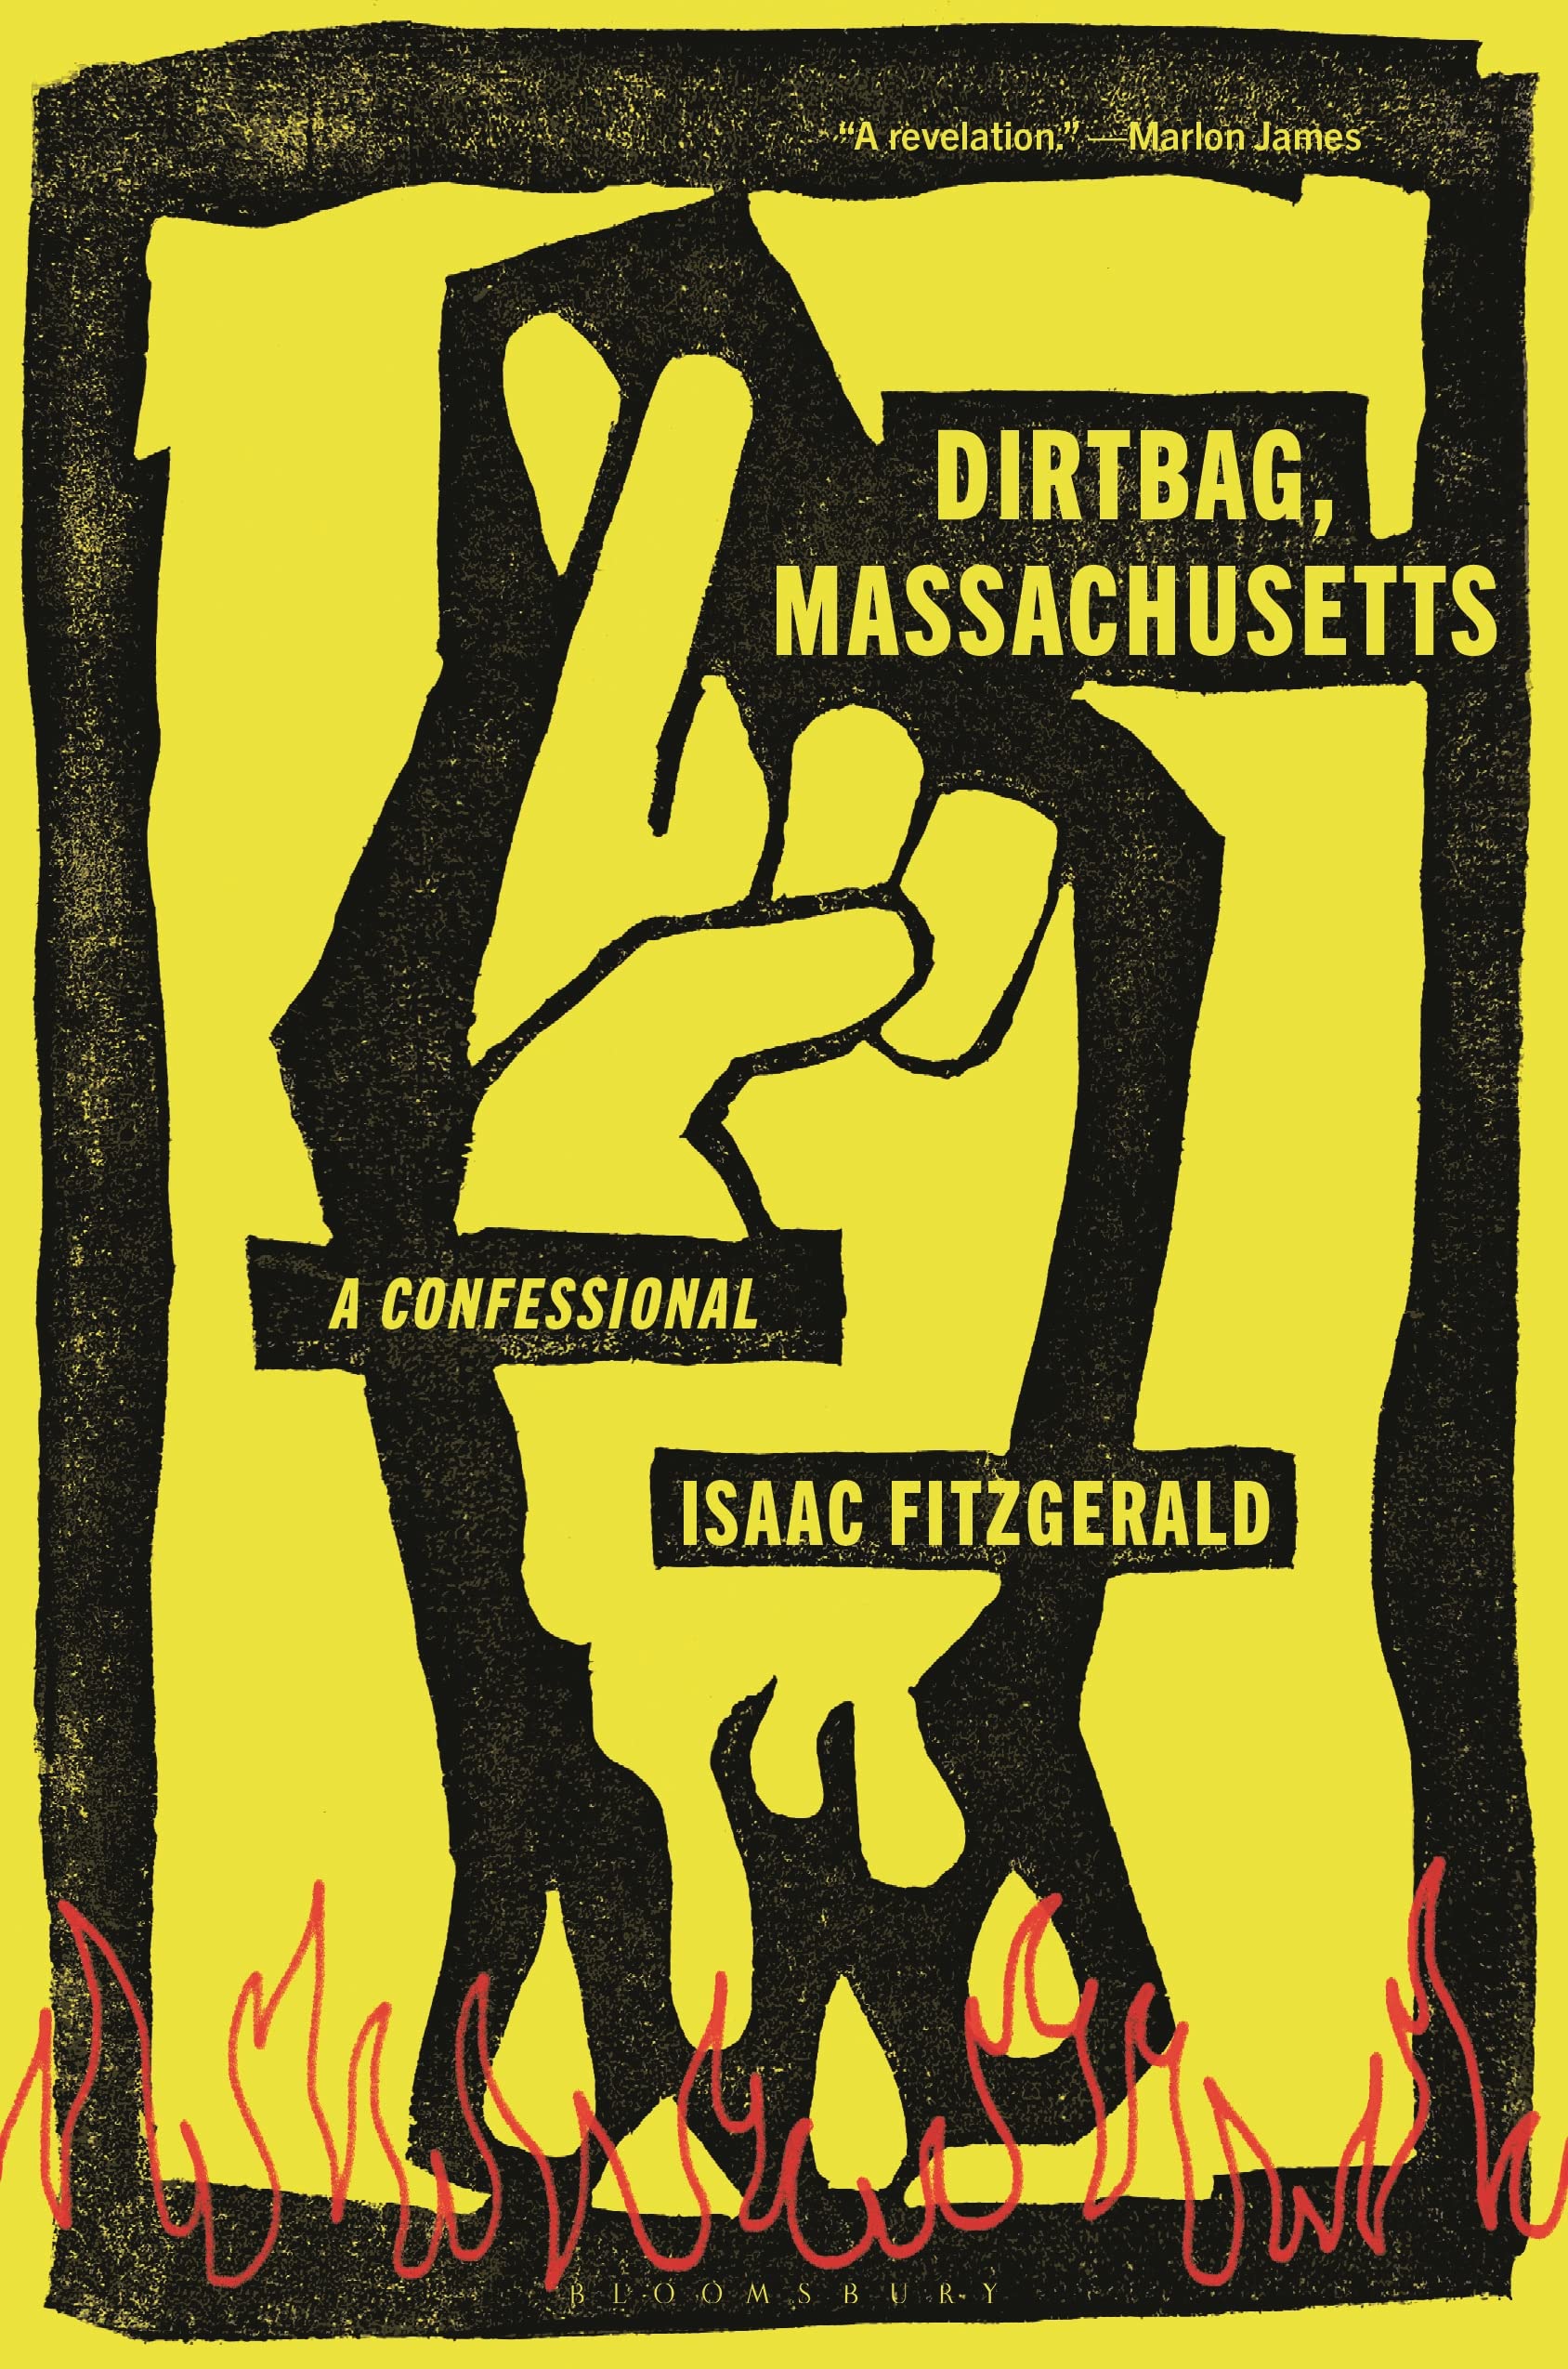 A graphic of the cover of Dirtbag, Massachusetts by Isaac Fitzgerald